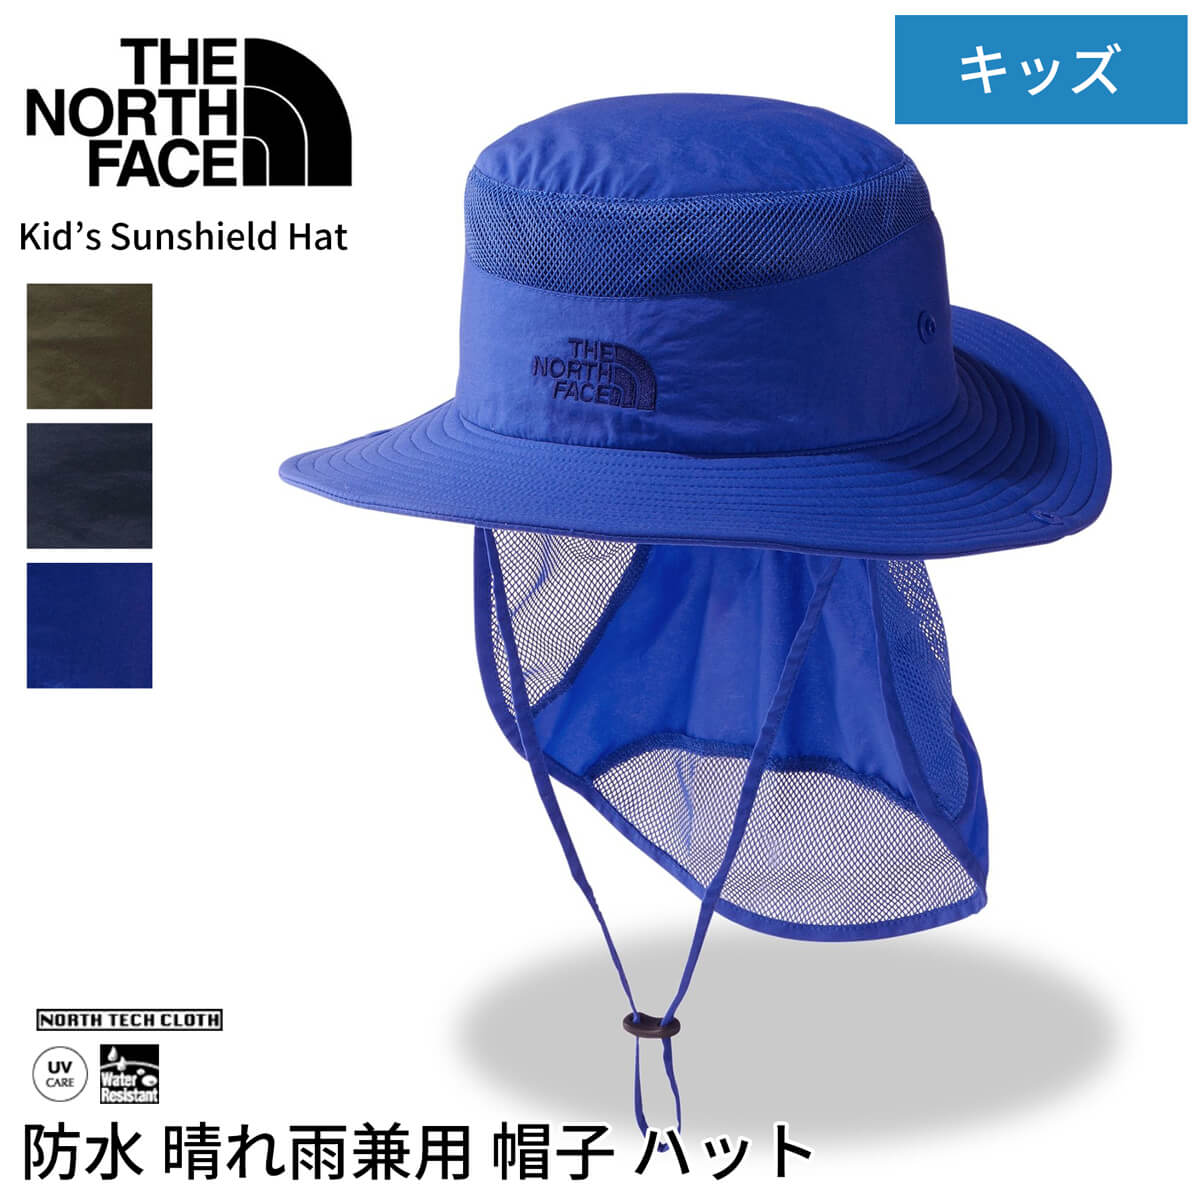 THE NORTH FACE] Kids Sun Shield Hat The North Face Kids Outdoor